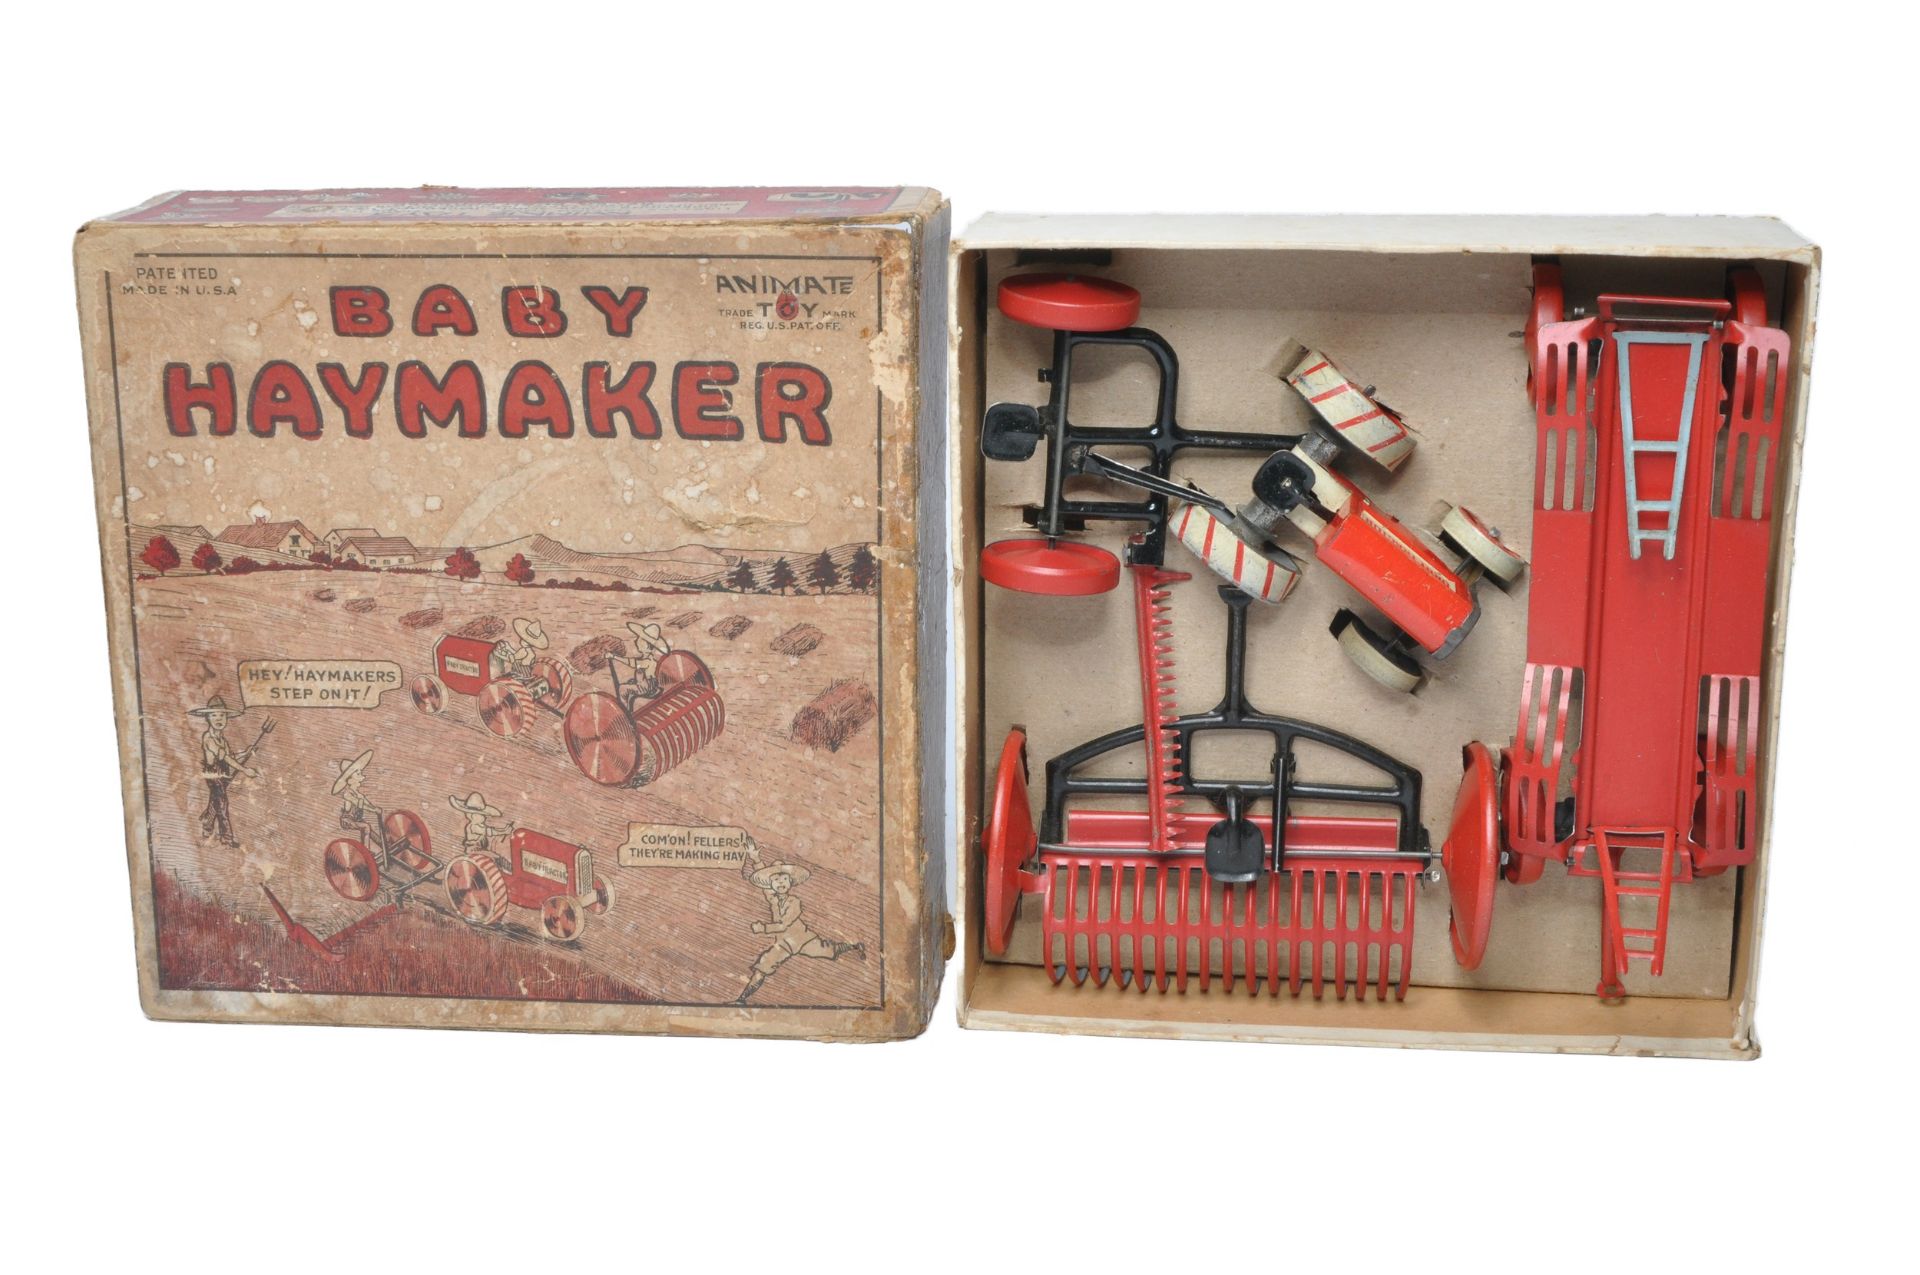 Animate (USA) 1920's Tinplate Baby Haymaker Tractor and Implement Set. Contents display excellent as